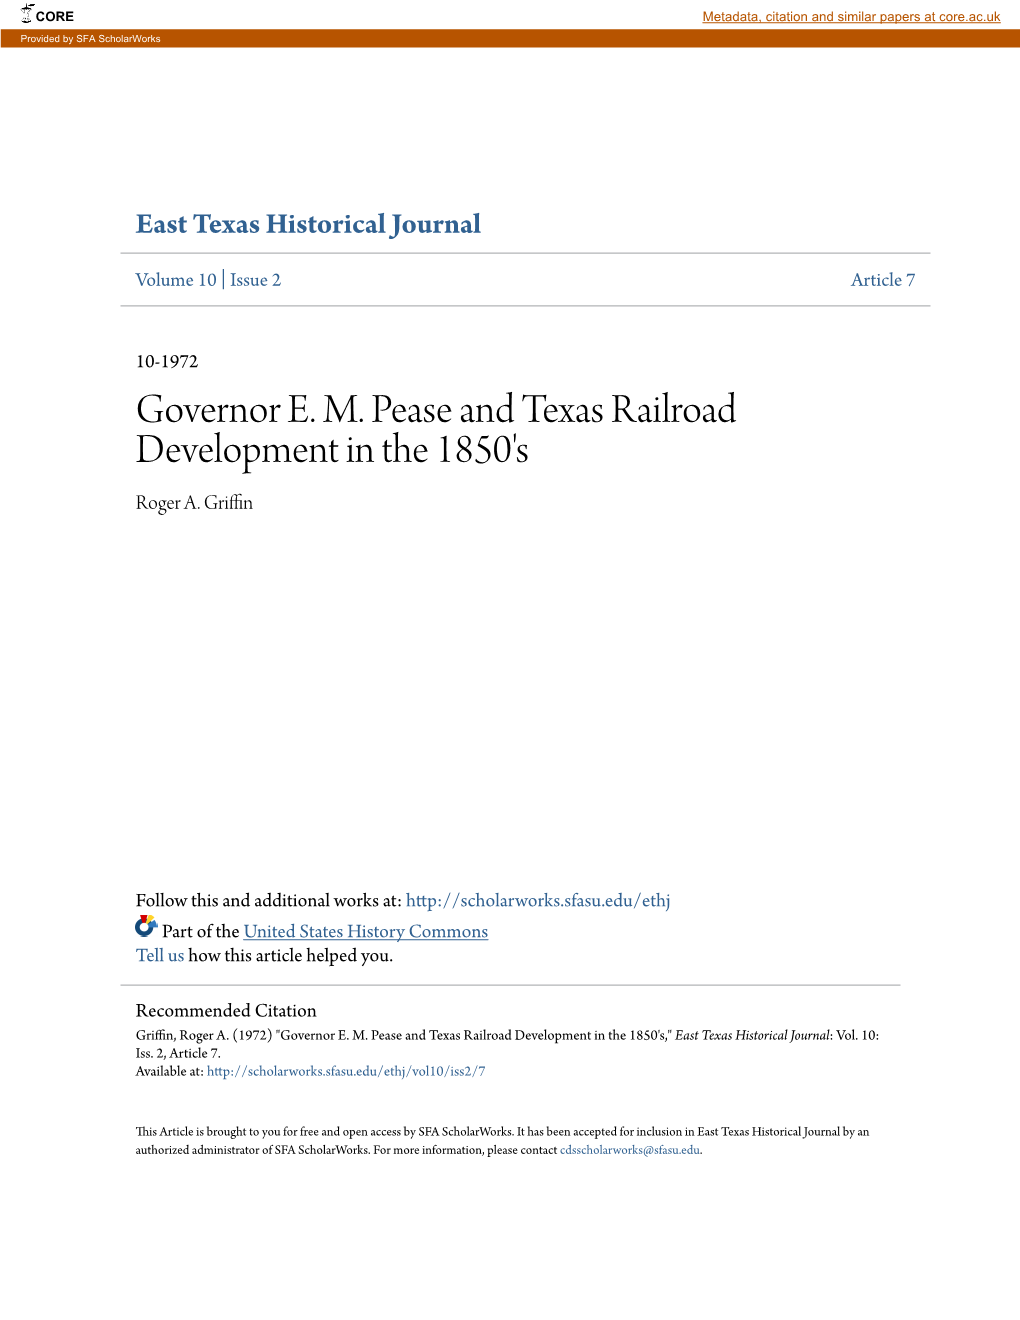 Governor E. M. Pease and Texas Railroad Development in the 1850'S Roger A